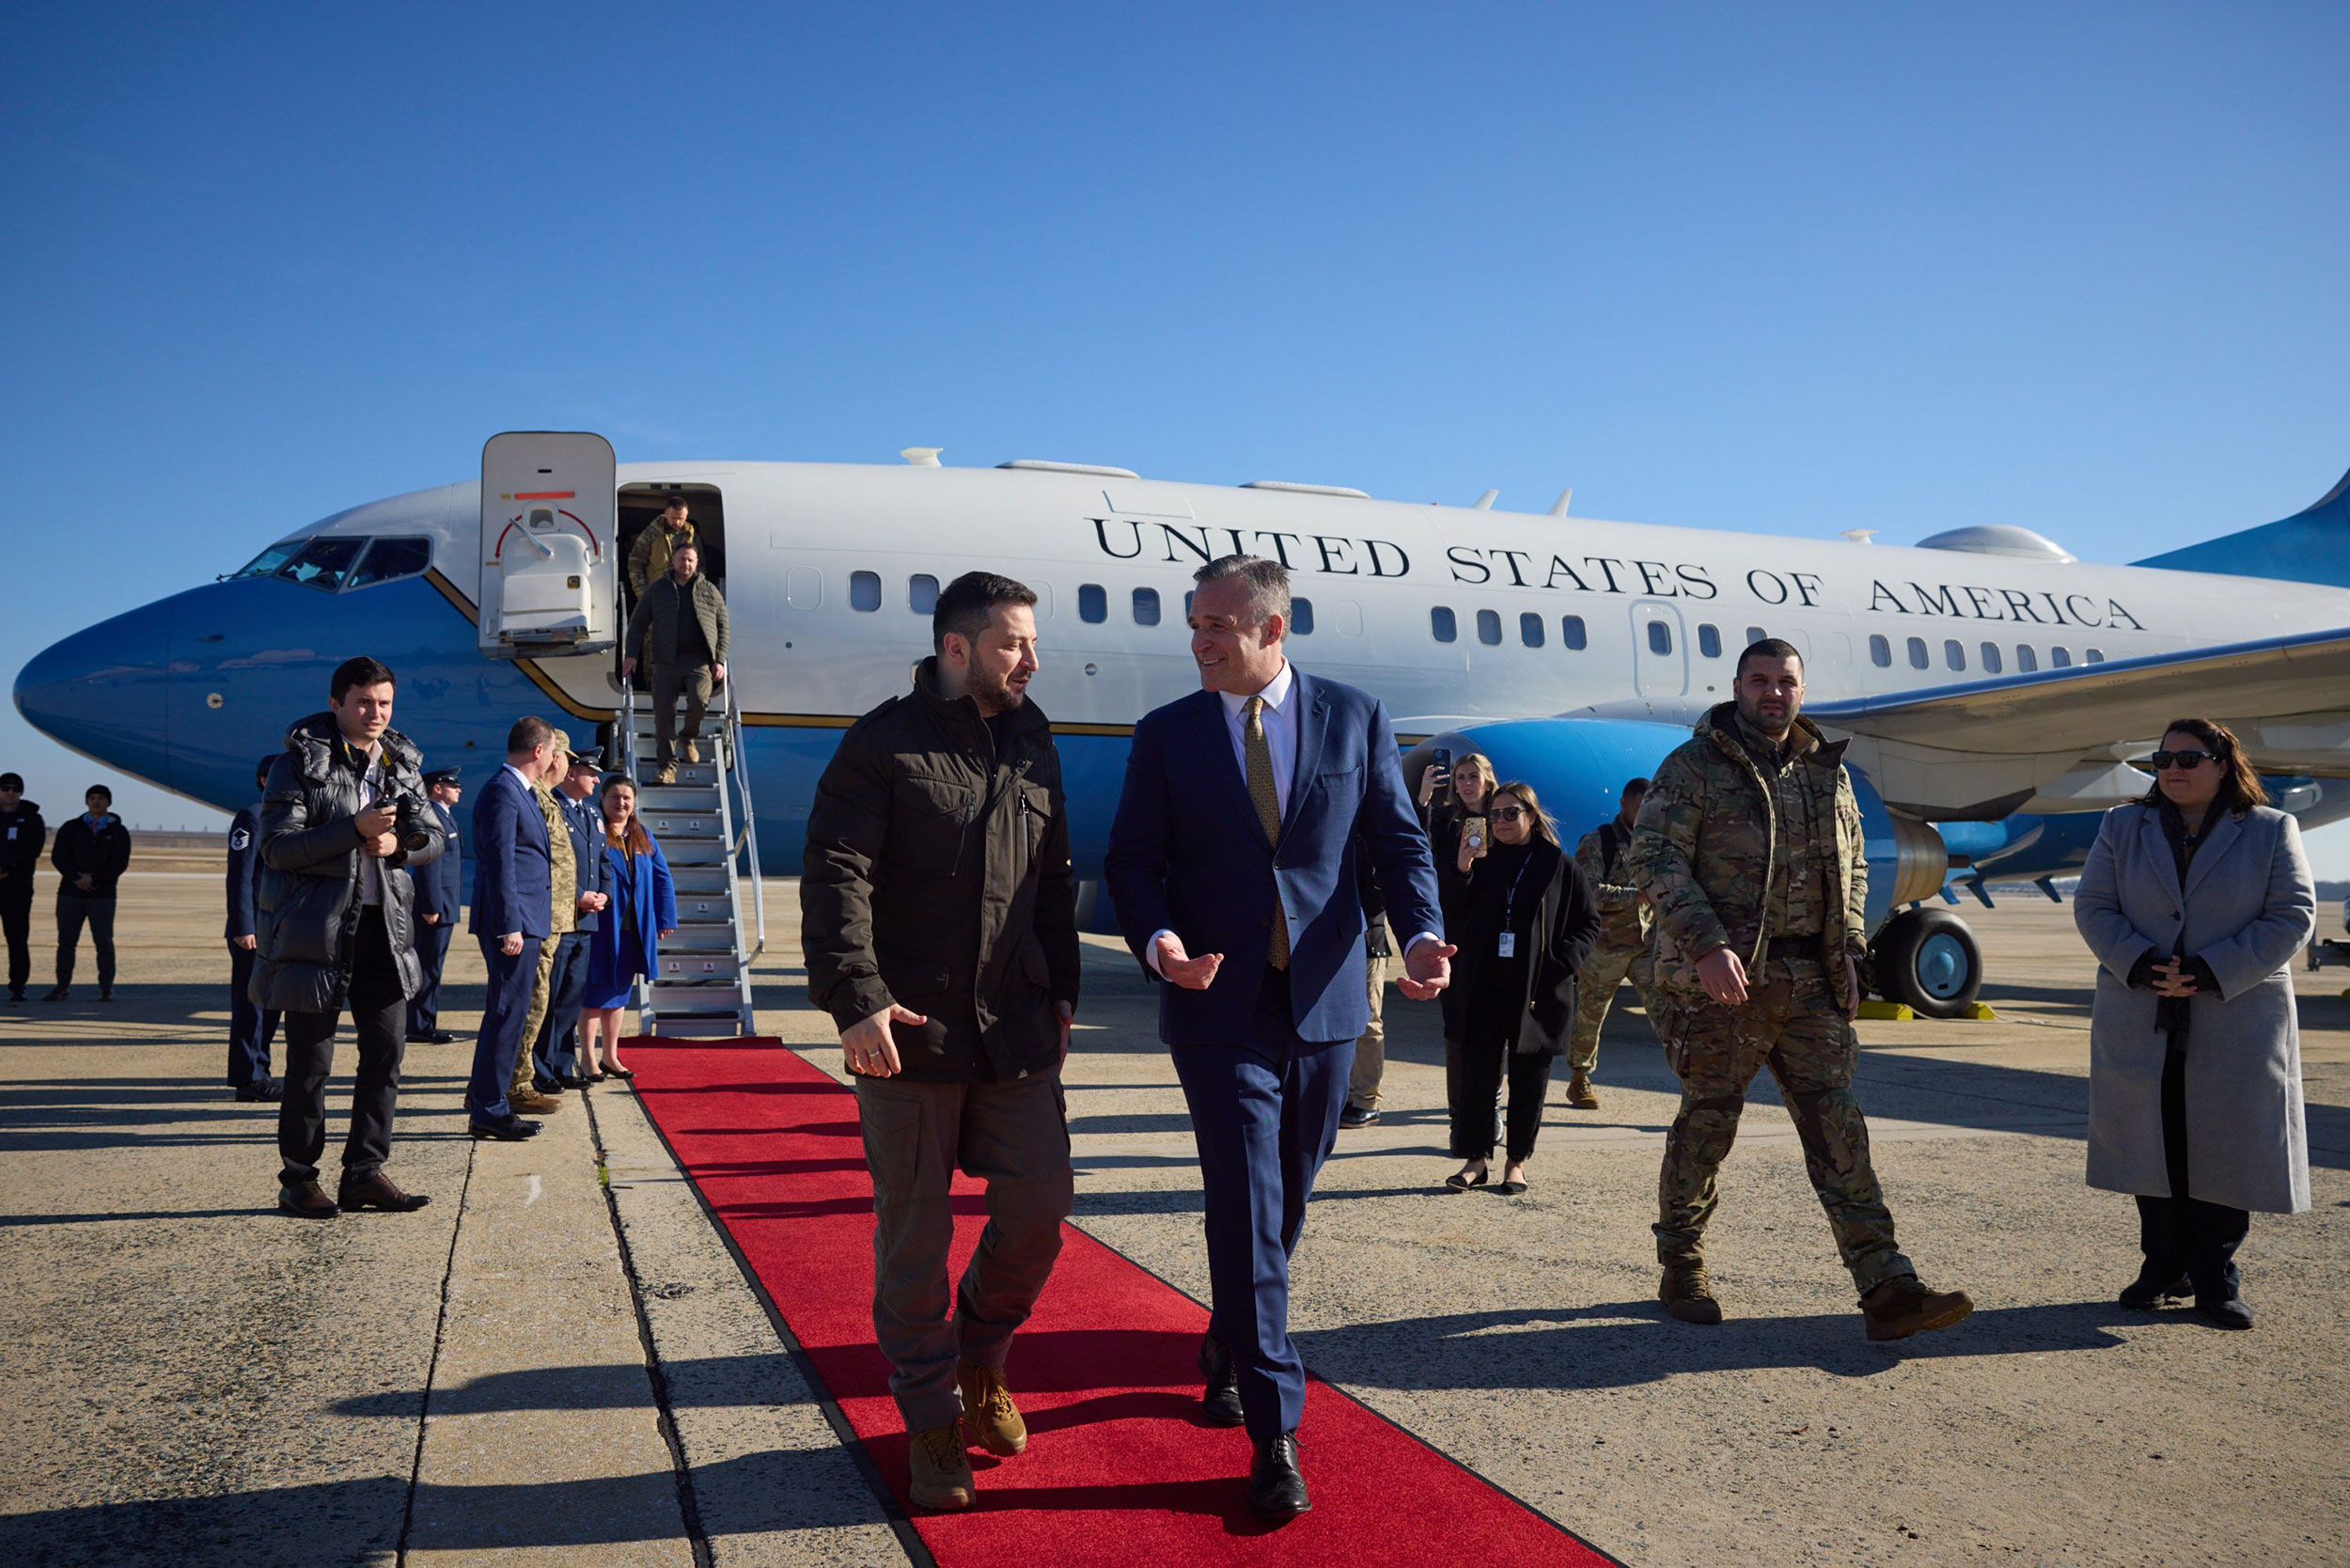 Ukrainian President Volodymyr Zelensky, left, is greeted by US chief of protocol Rufus Gifford after landing in the United States on Wednesday.